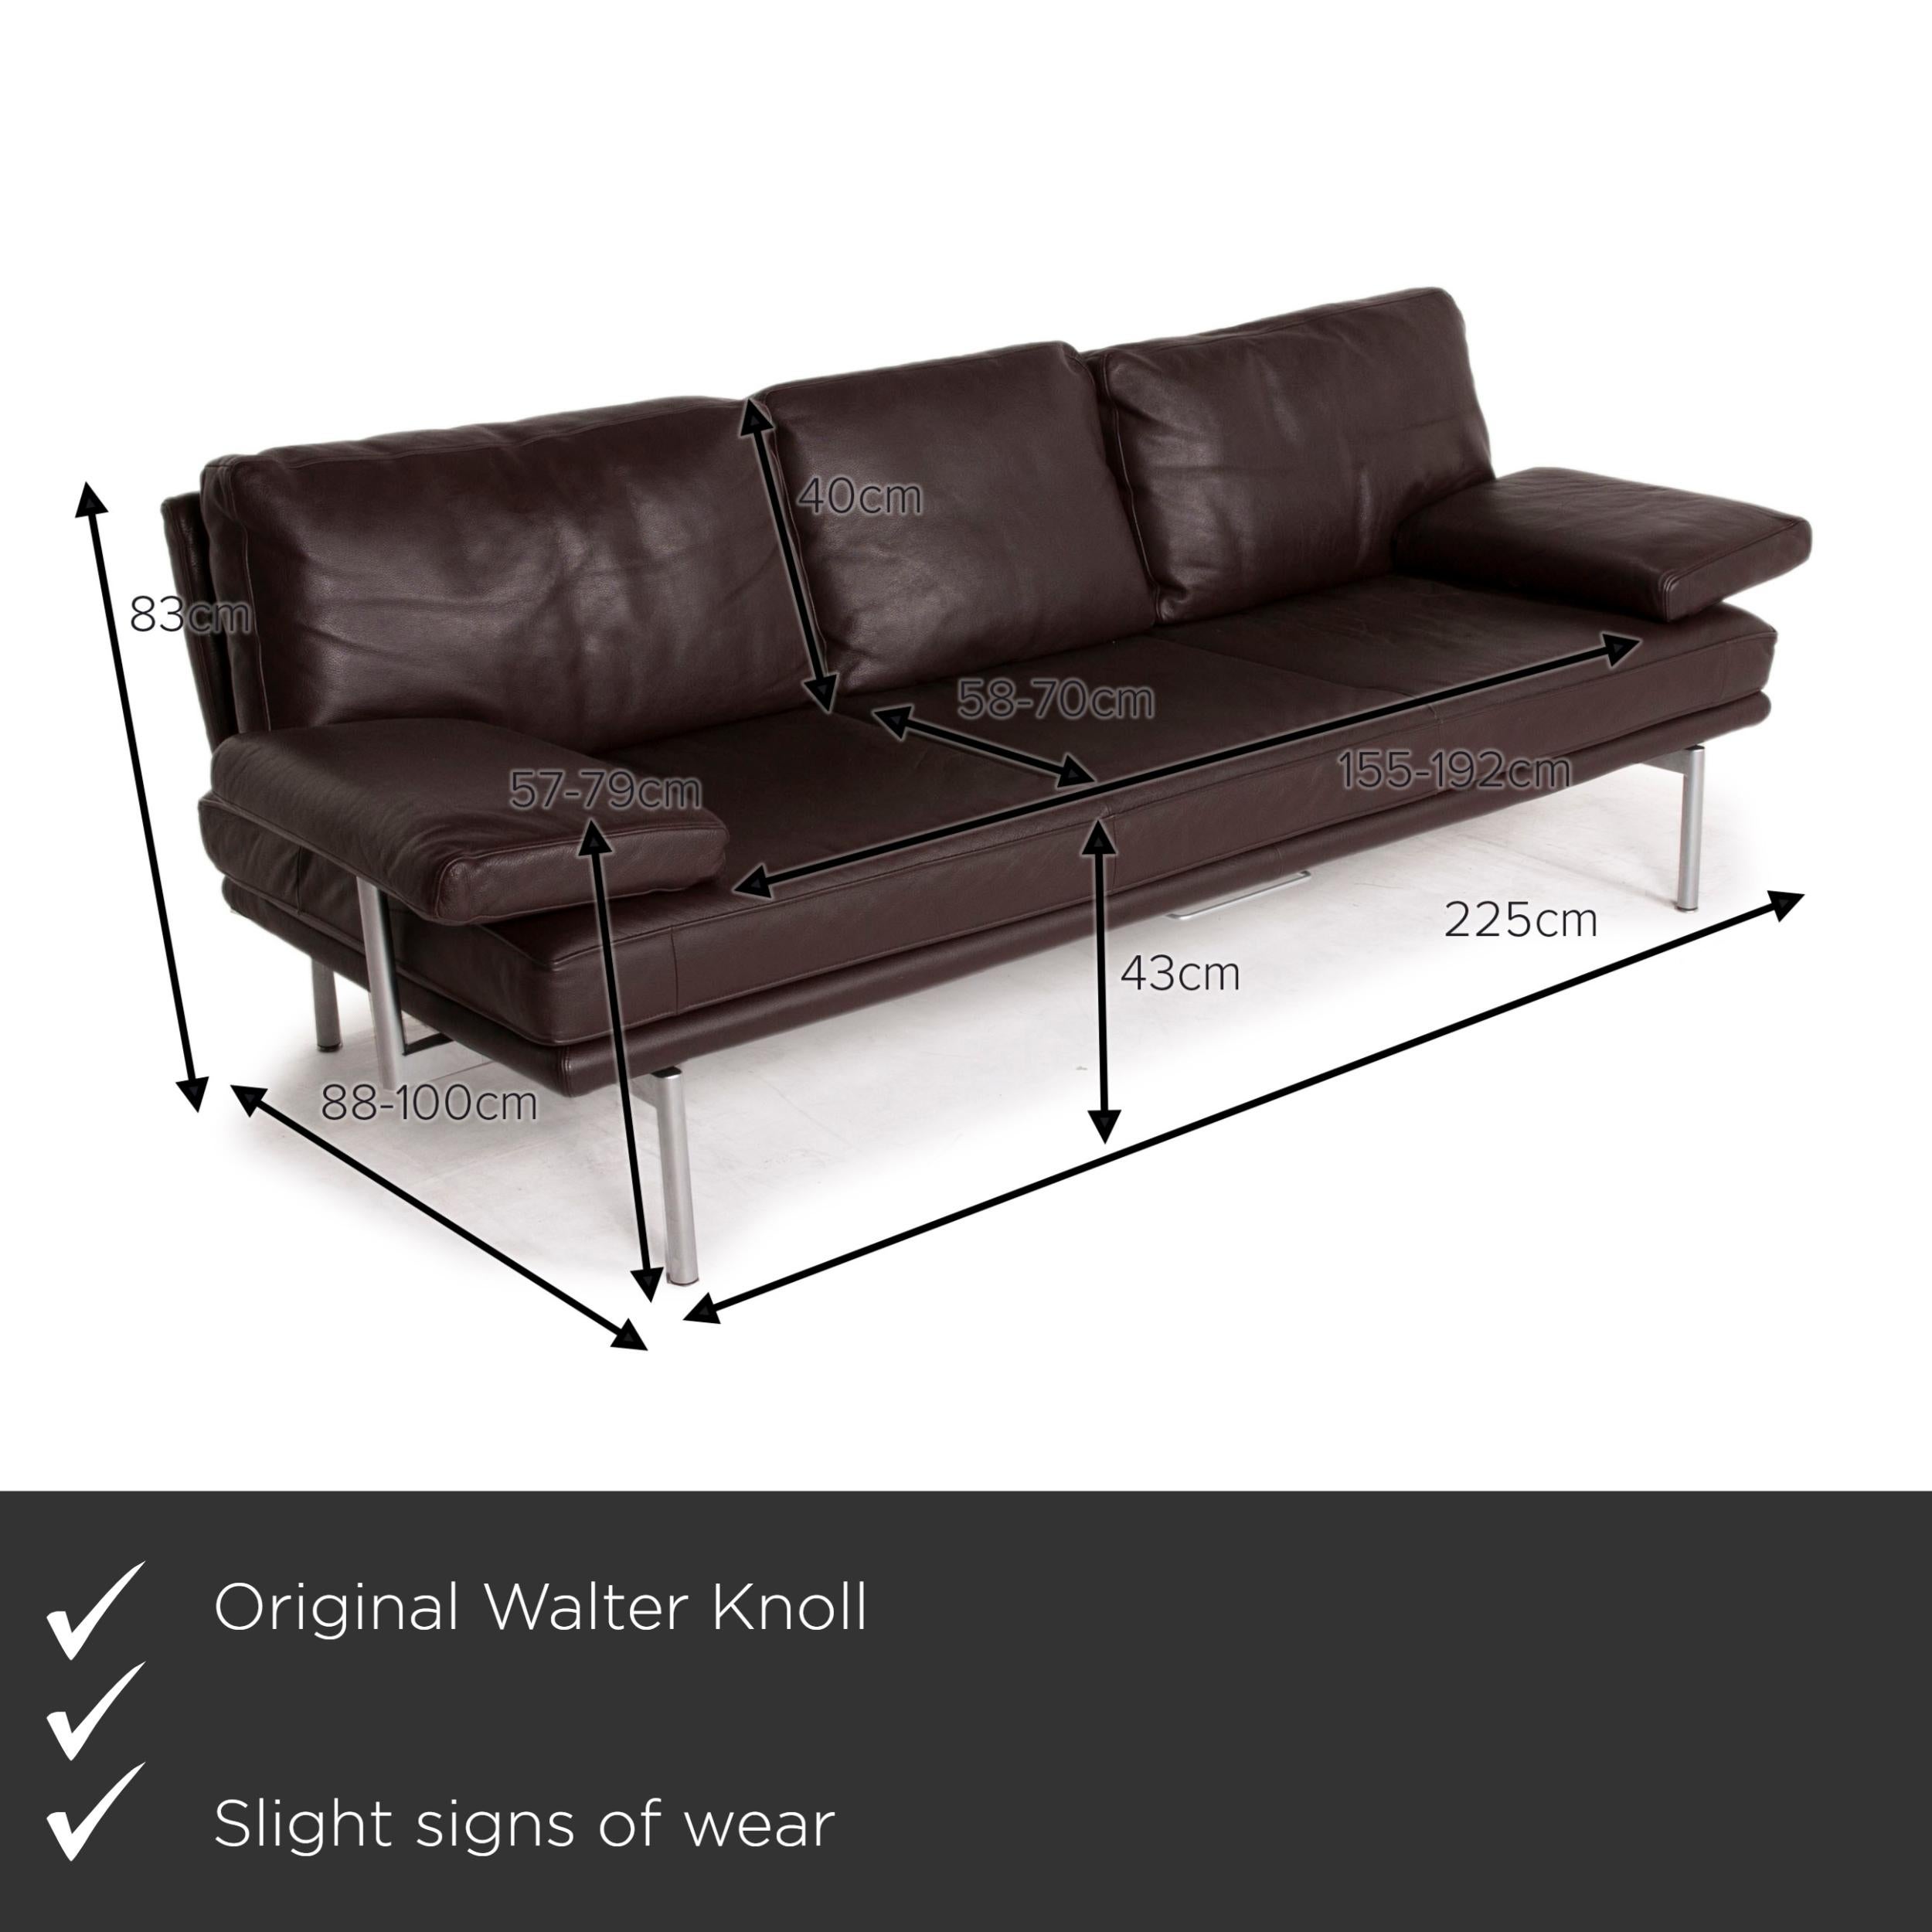 We present to you a Walter Knoll Living Platform leather sofa brown three-seater function dark brown.


 Product measurements in centimeters:
 

Depth: 88
Width: 225
Height: 83
Seat height: 43
Rest height: 57
Seat depth: 58
Seat width: